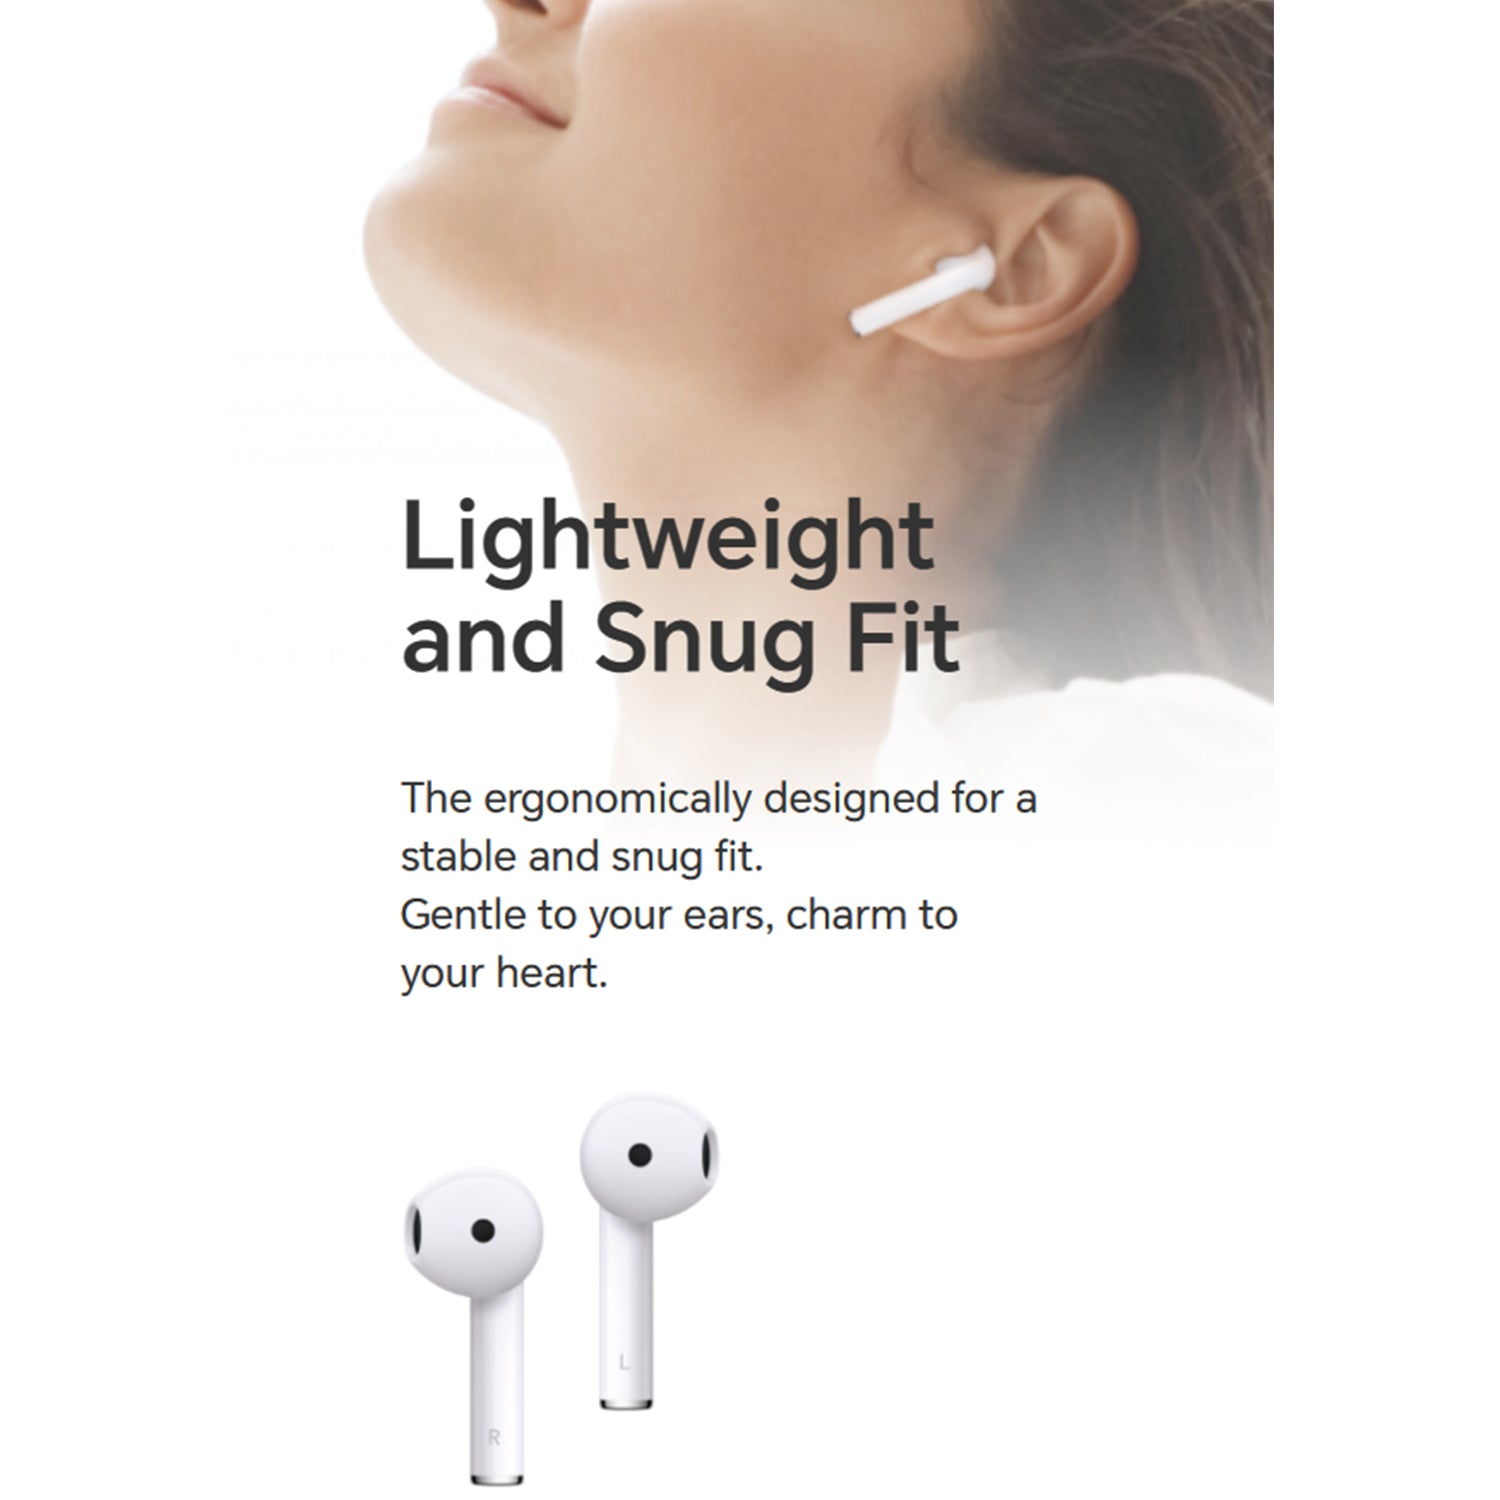 HONOR Earbuds X5, White